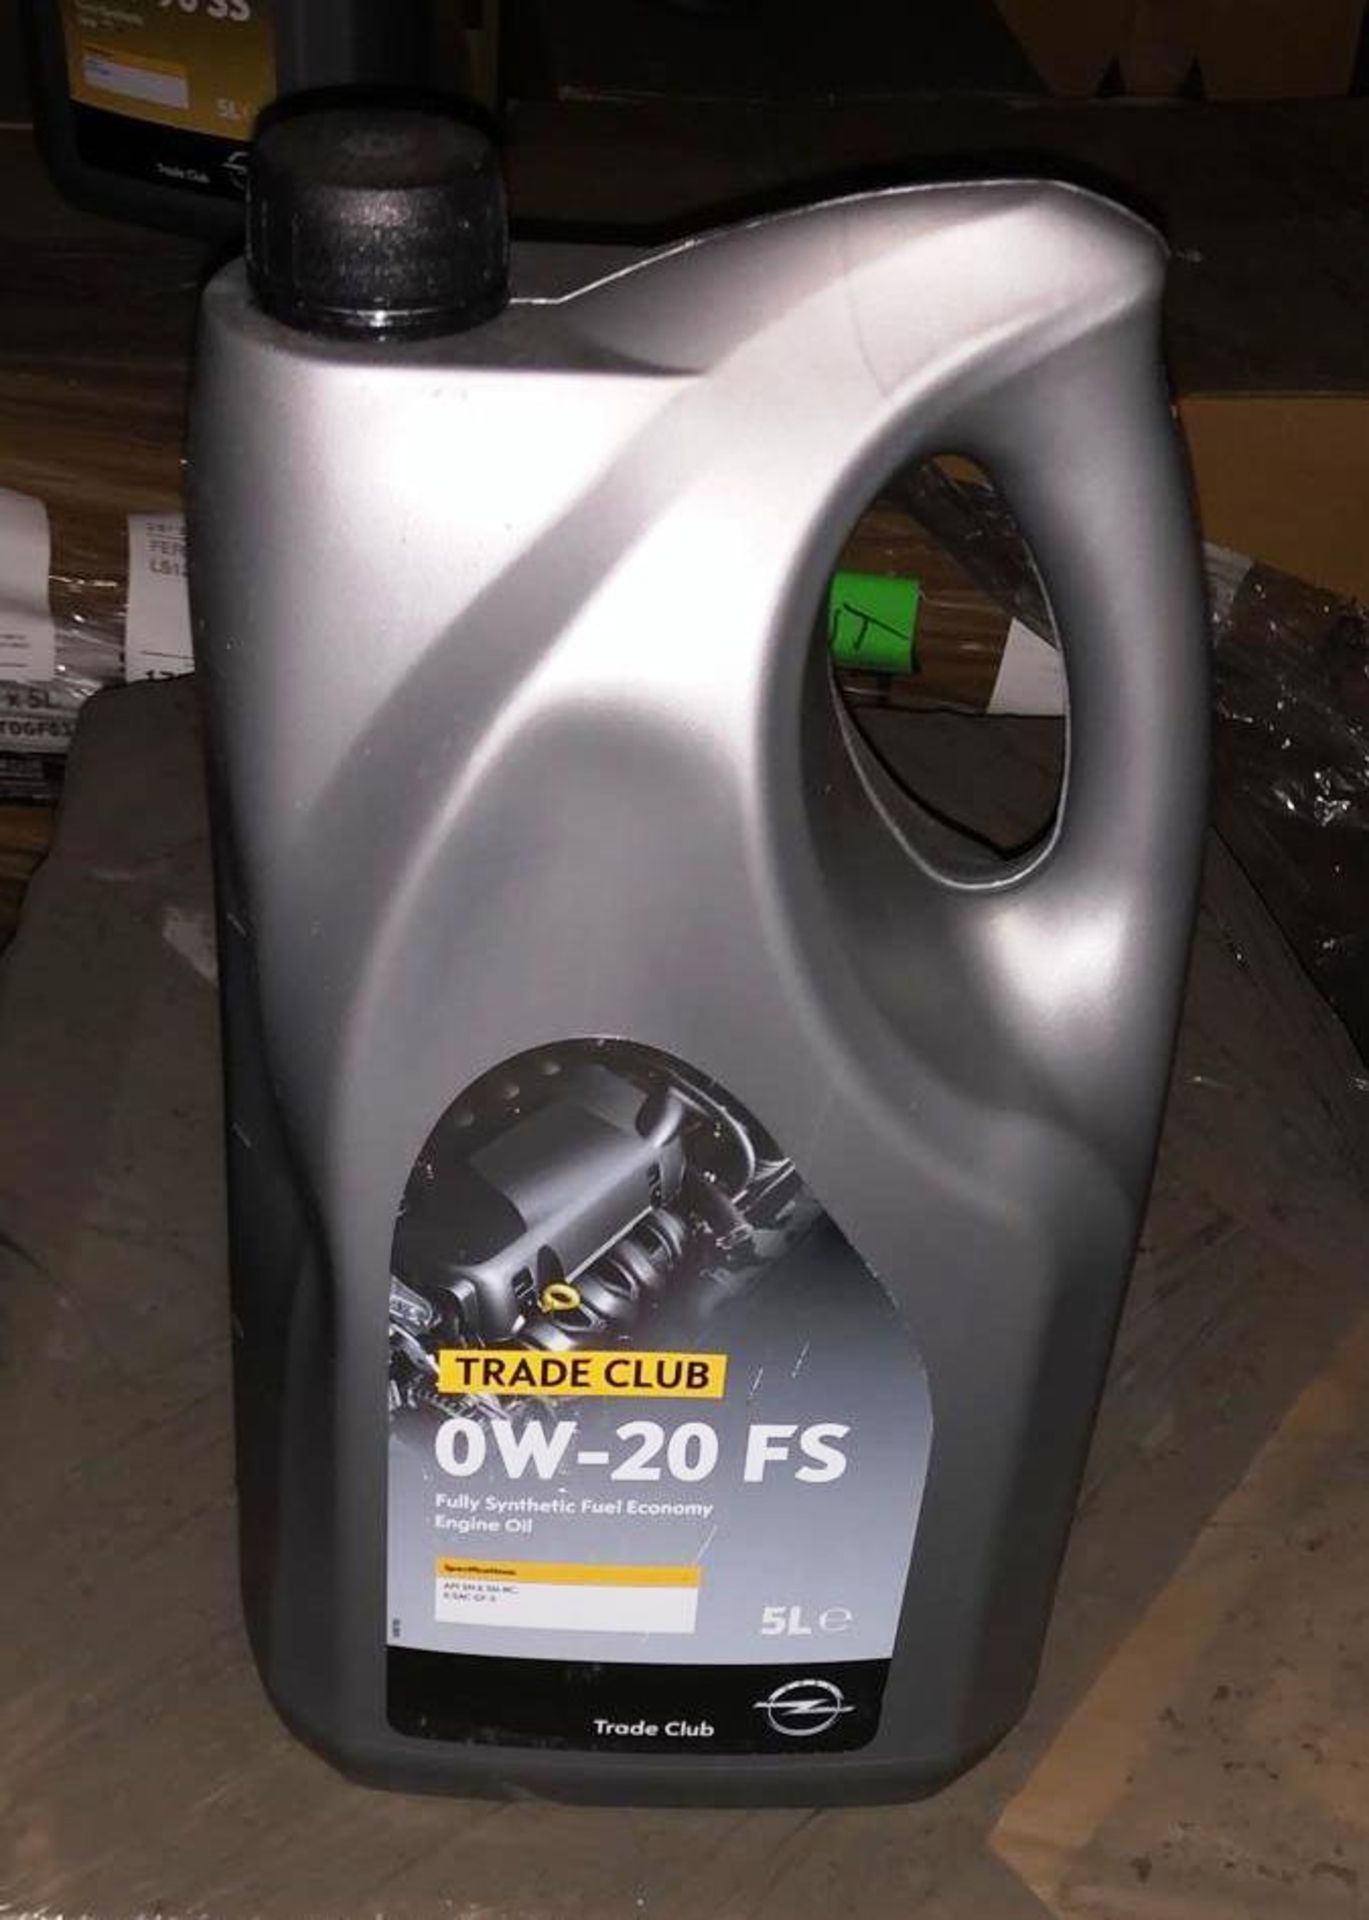 52 x 5 litre tubs of Trade Club 0W-20 FS fully synthetic fuel economy engine oil on 1 pallet (pallet